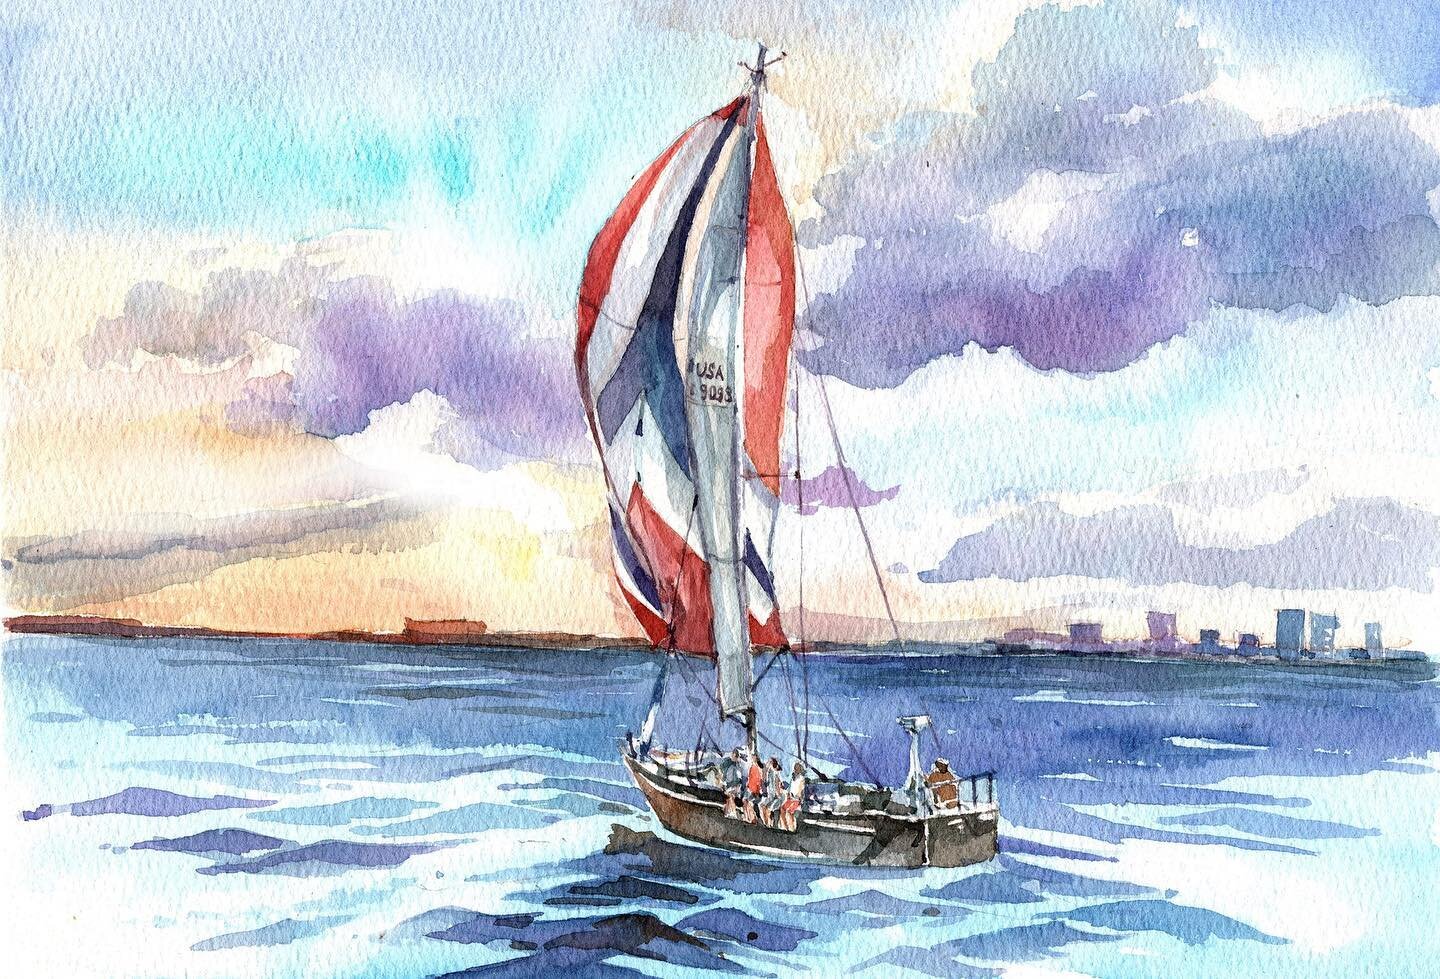 Gorgeous watercolor of our sailboat, Red Dog, in her full glory. Come sail with us!